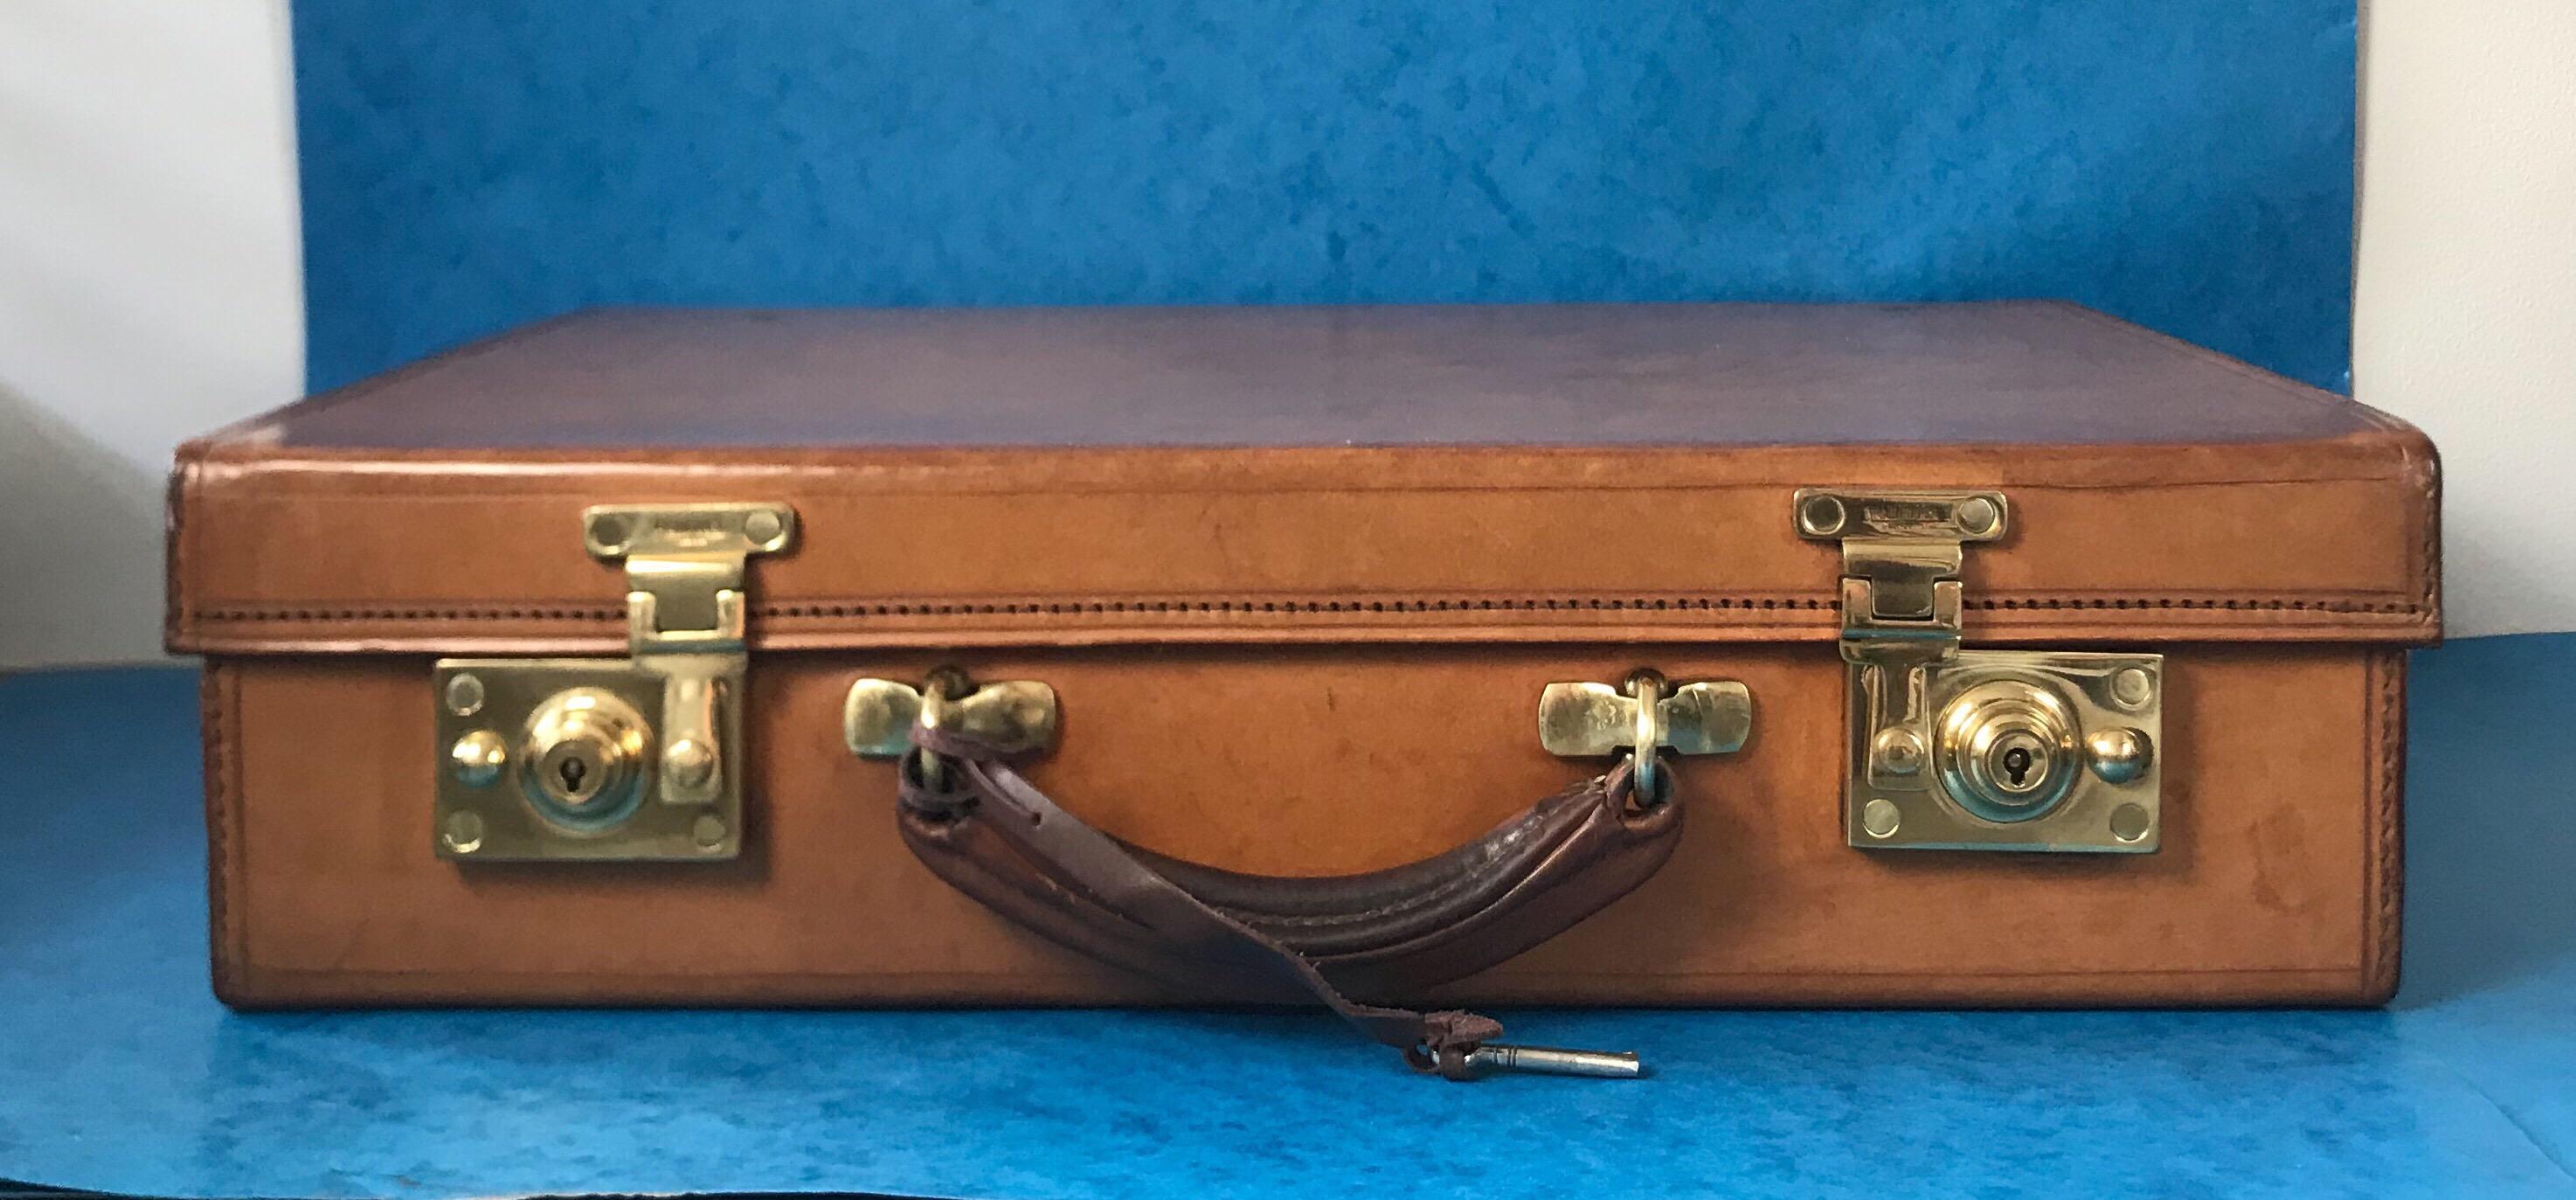 A 1960-1970 hide leather attaché case by “W & H Gidden” the leather is in superb condition, it has good quality gilt and brass fittings, it has a working lock and key, a stationary compartment to the back and a royal stamp to the back of the